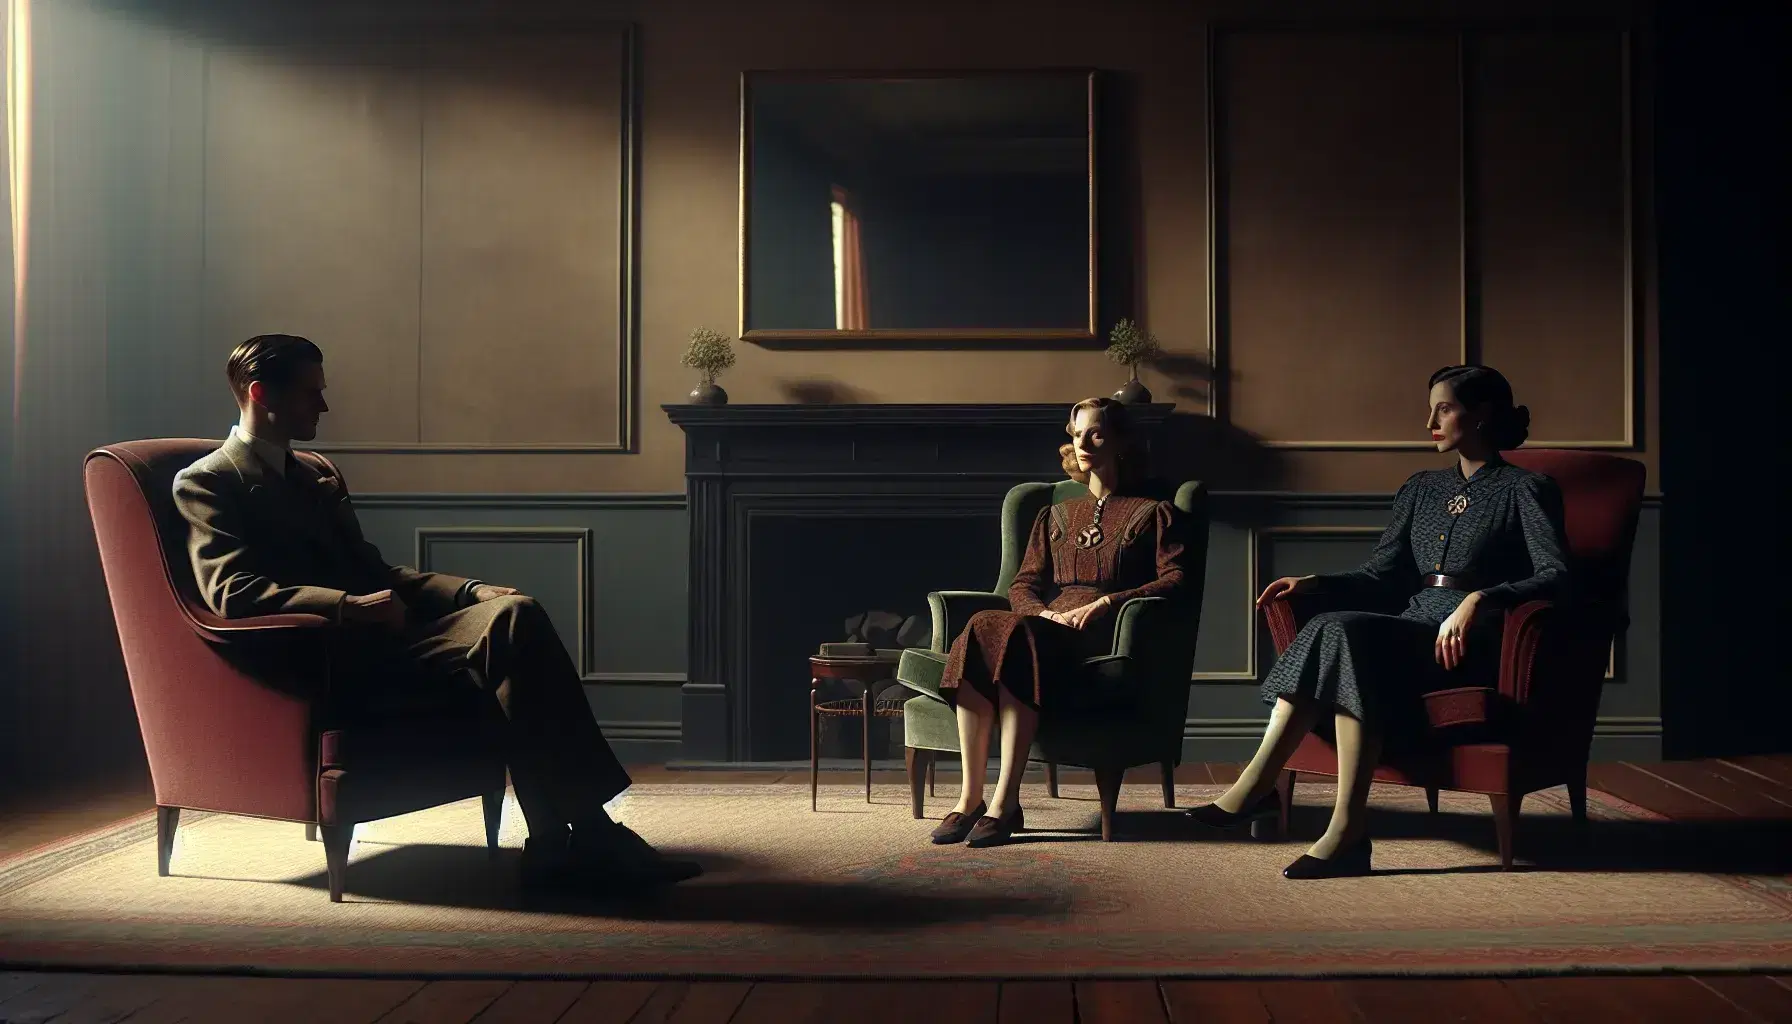 Three diverse individuals seated in vintage armchairs within a dimly lit, minimalist room with a plain fireplace and mirror.